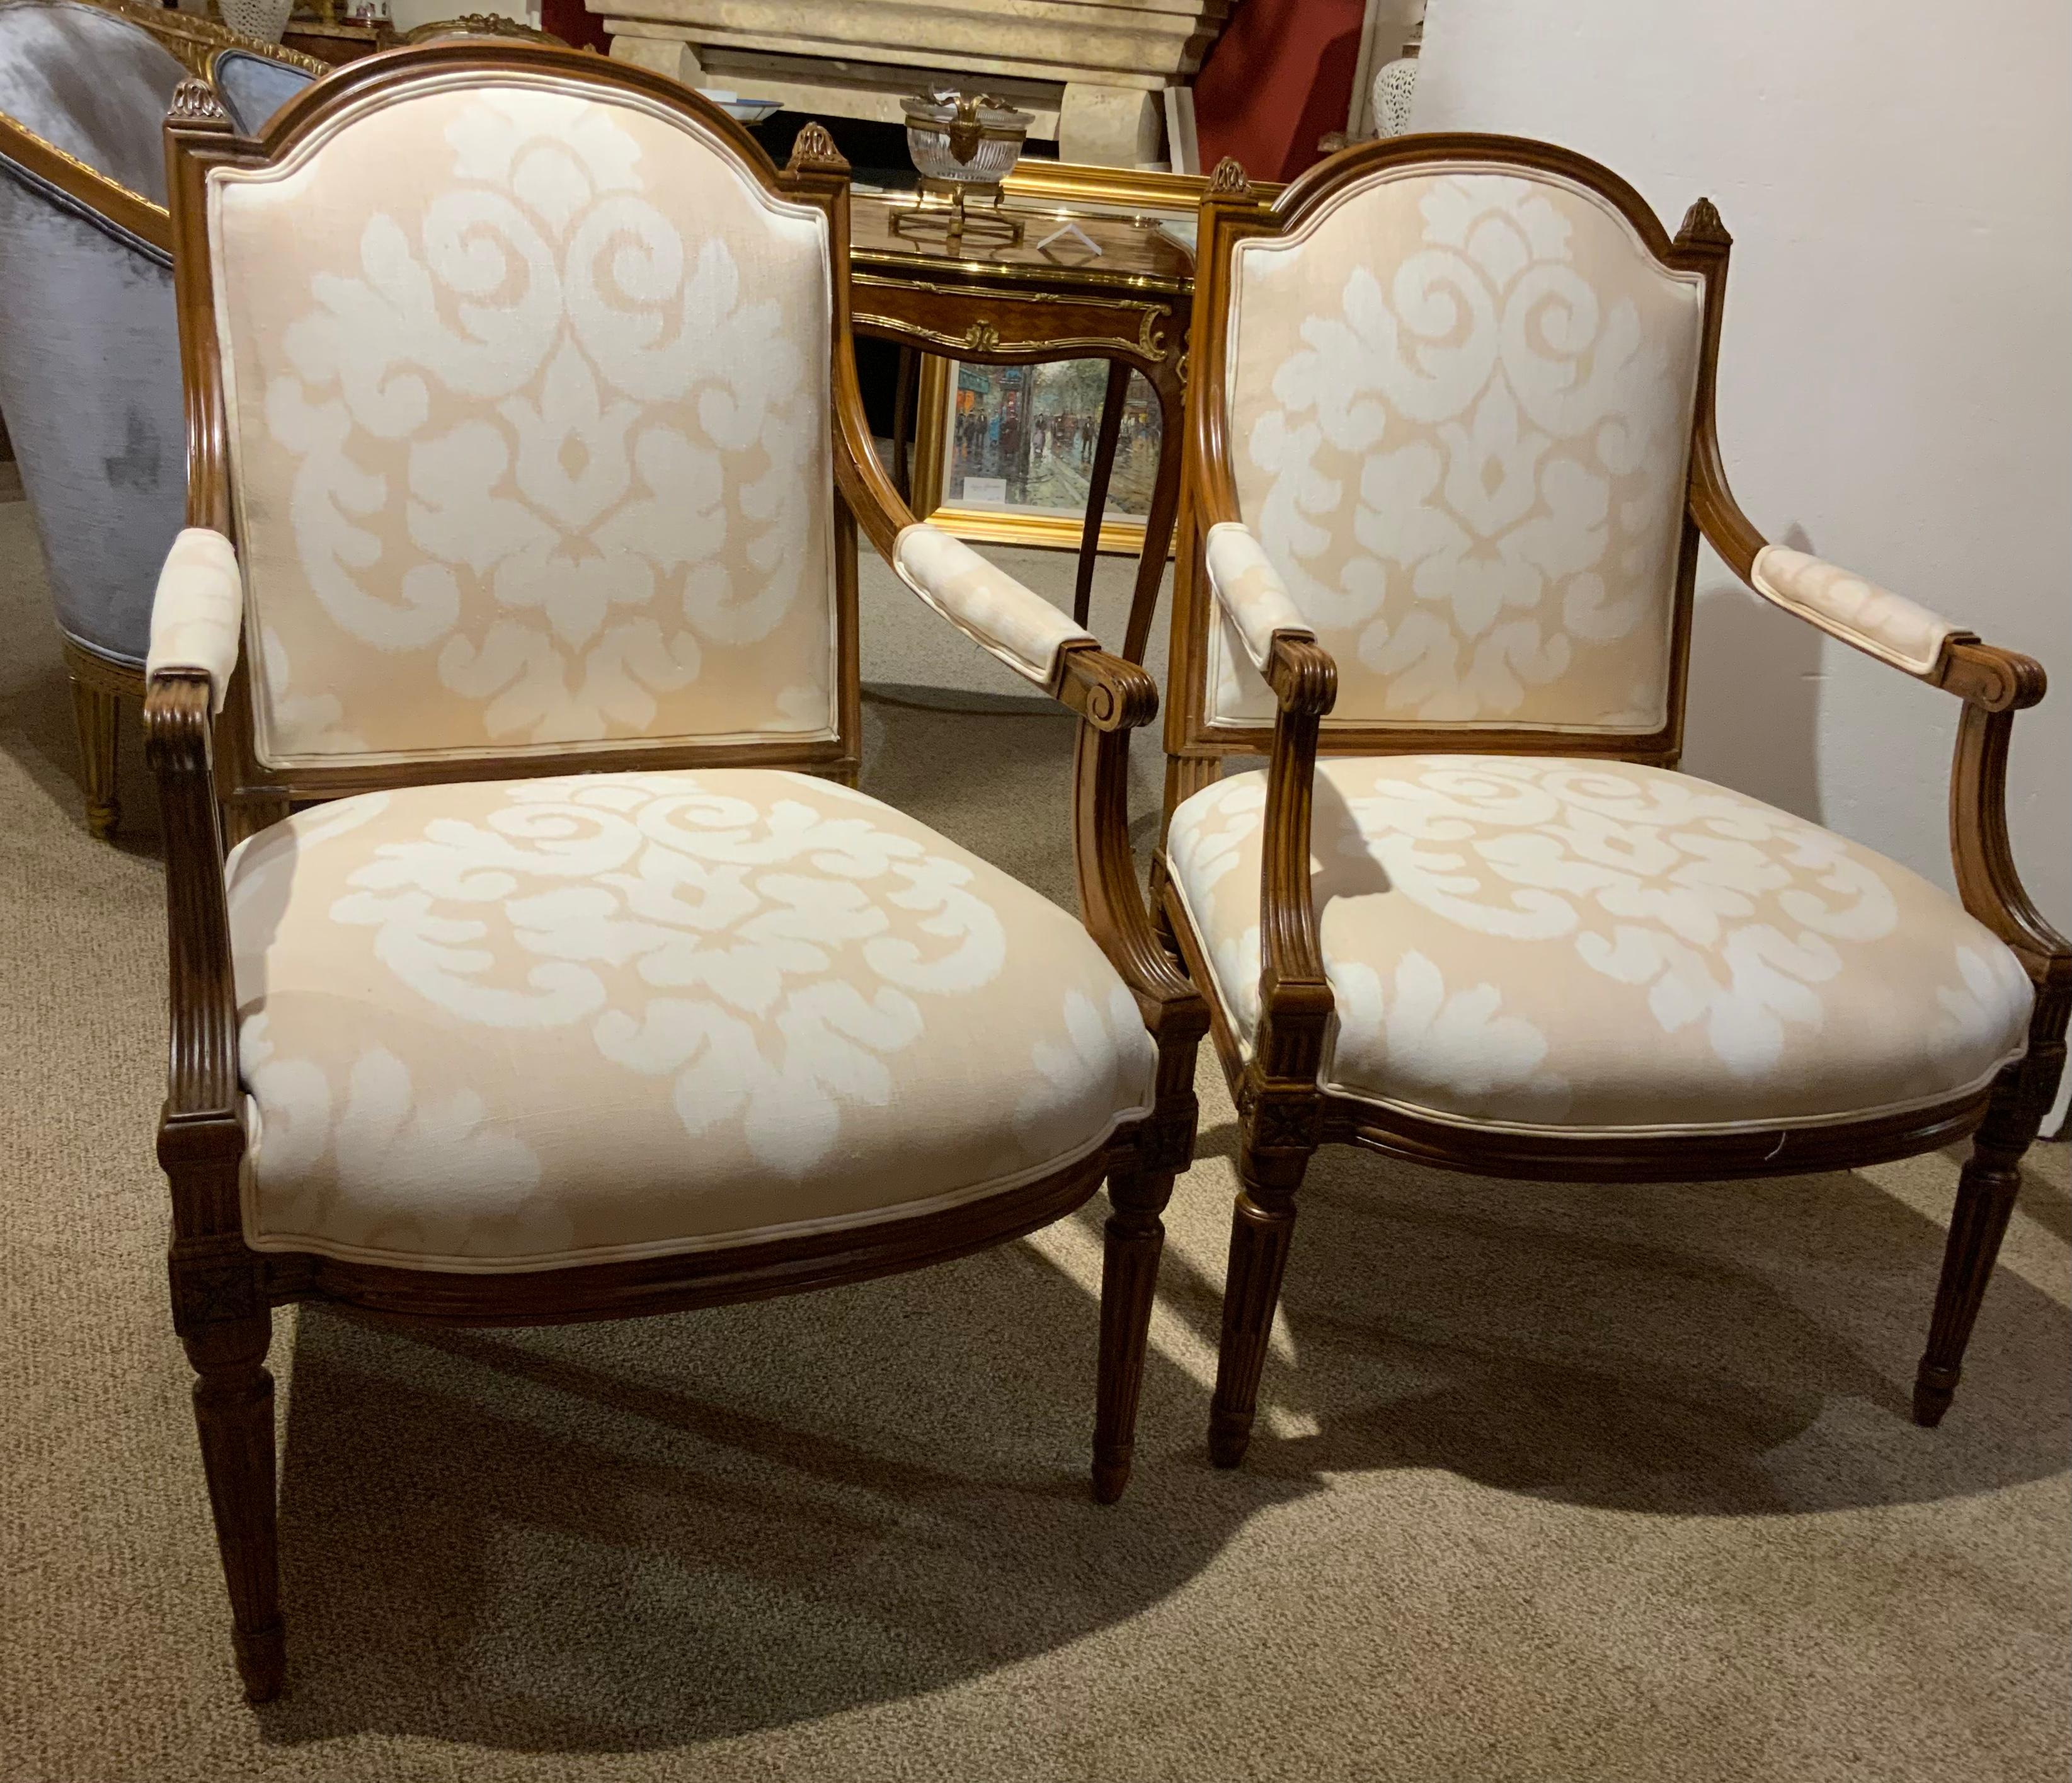 Pair of Walnut Louis XVI—Style Arm Chairs 19th Century with Domed Back For Sale 2